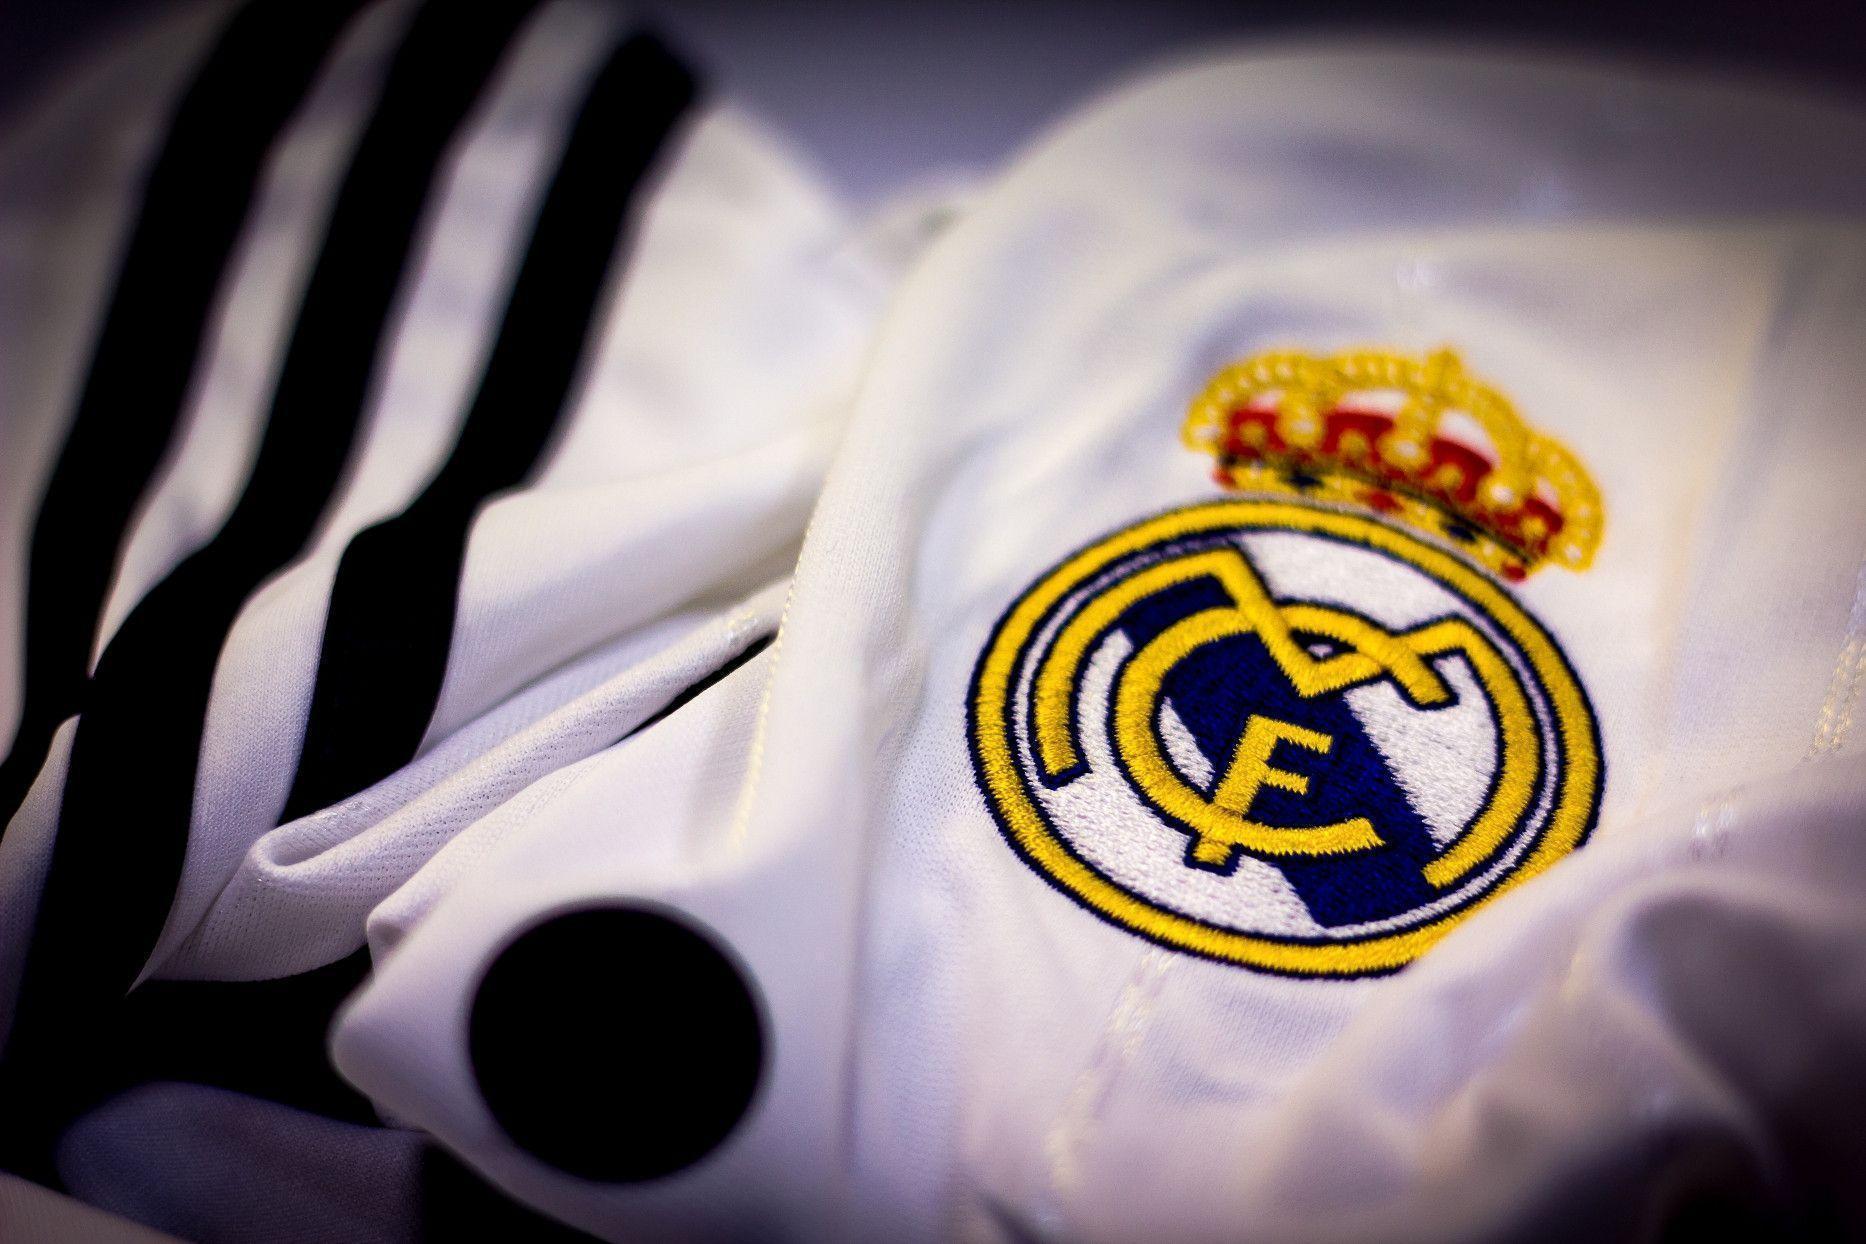 Cool Real Madrid Logo Wallpaper Free for Windows 1440x1080PX